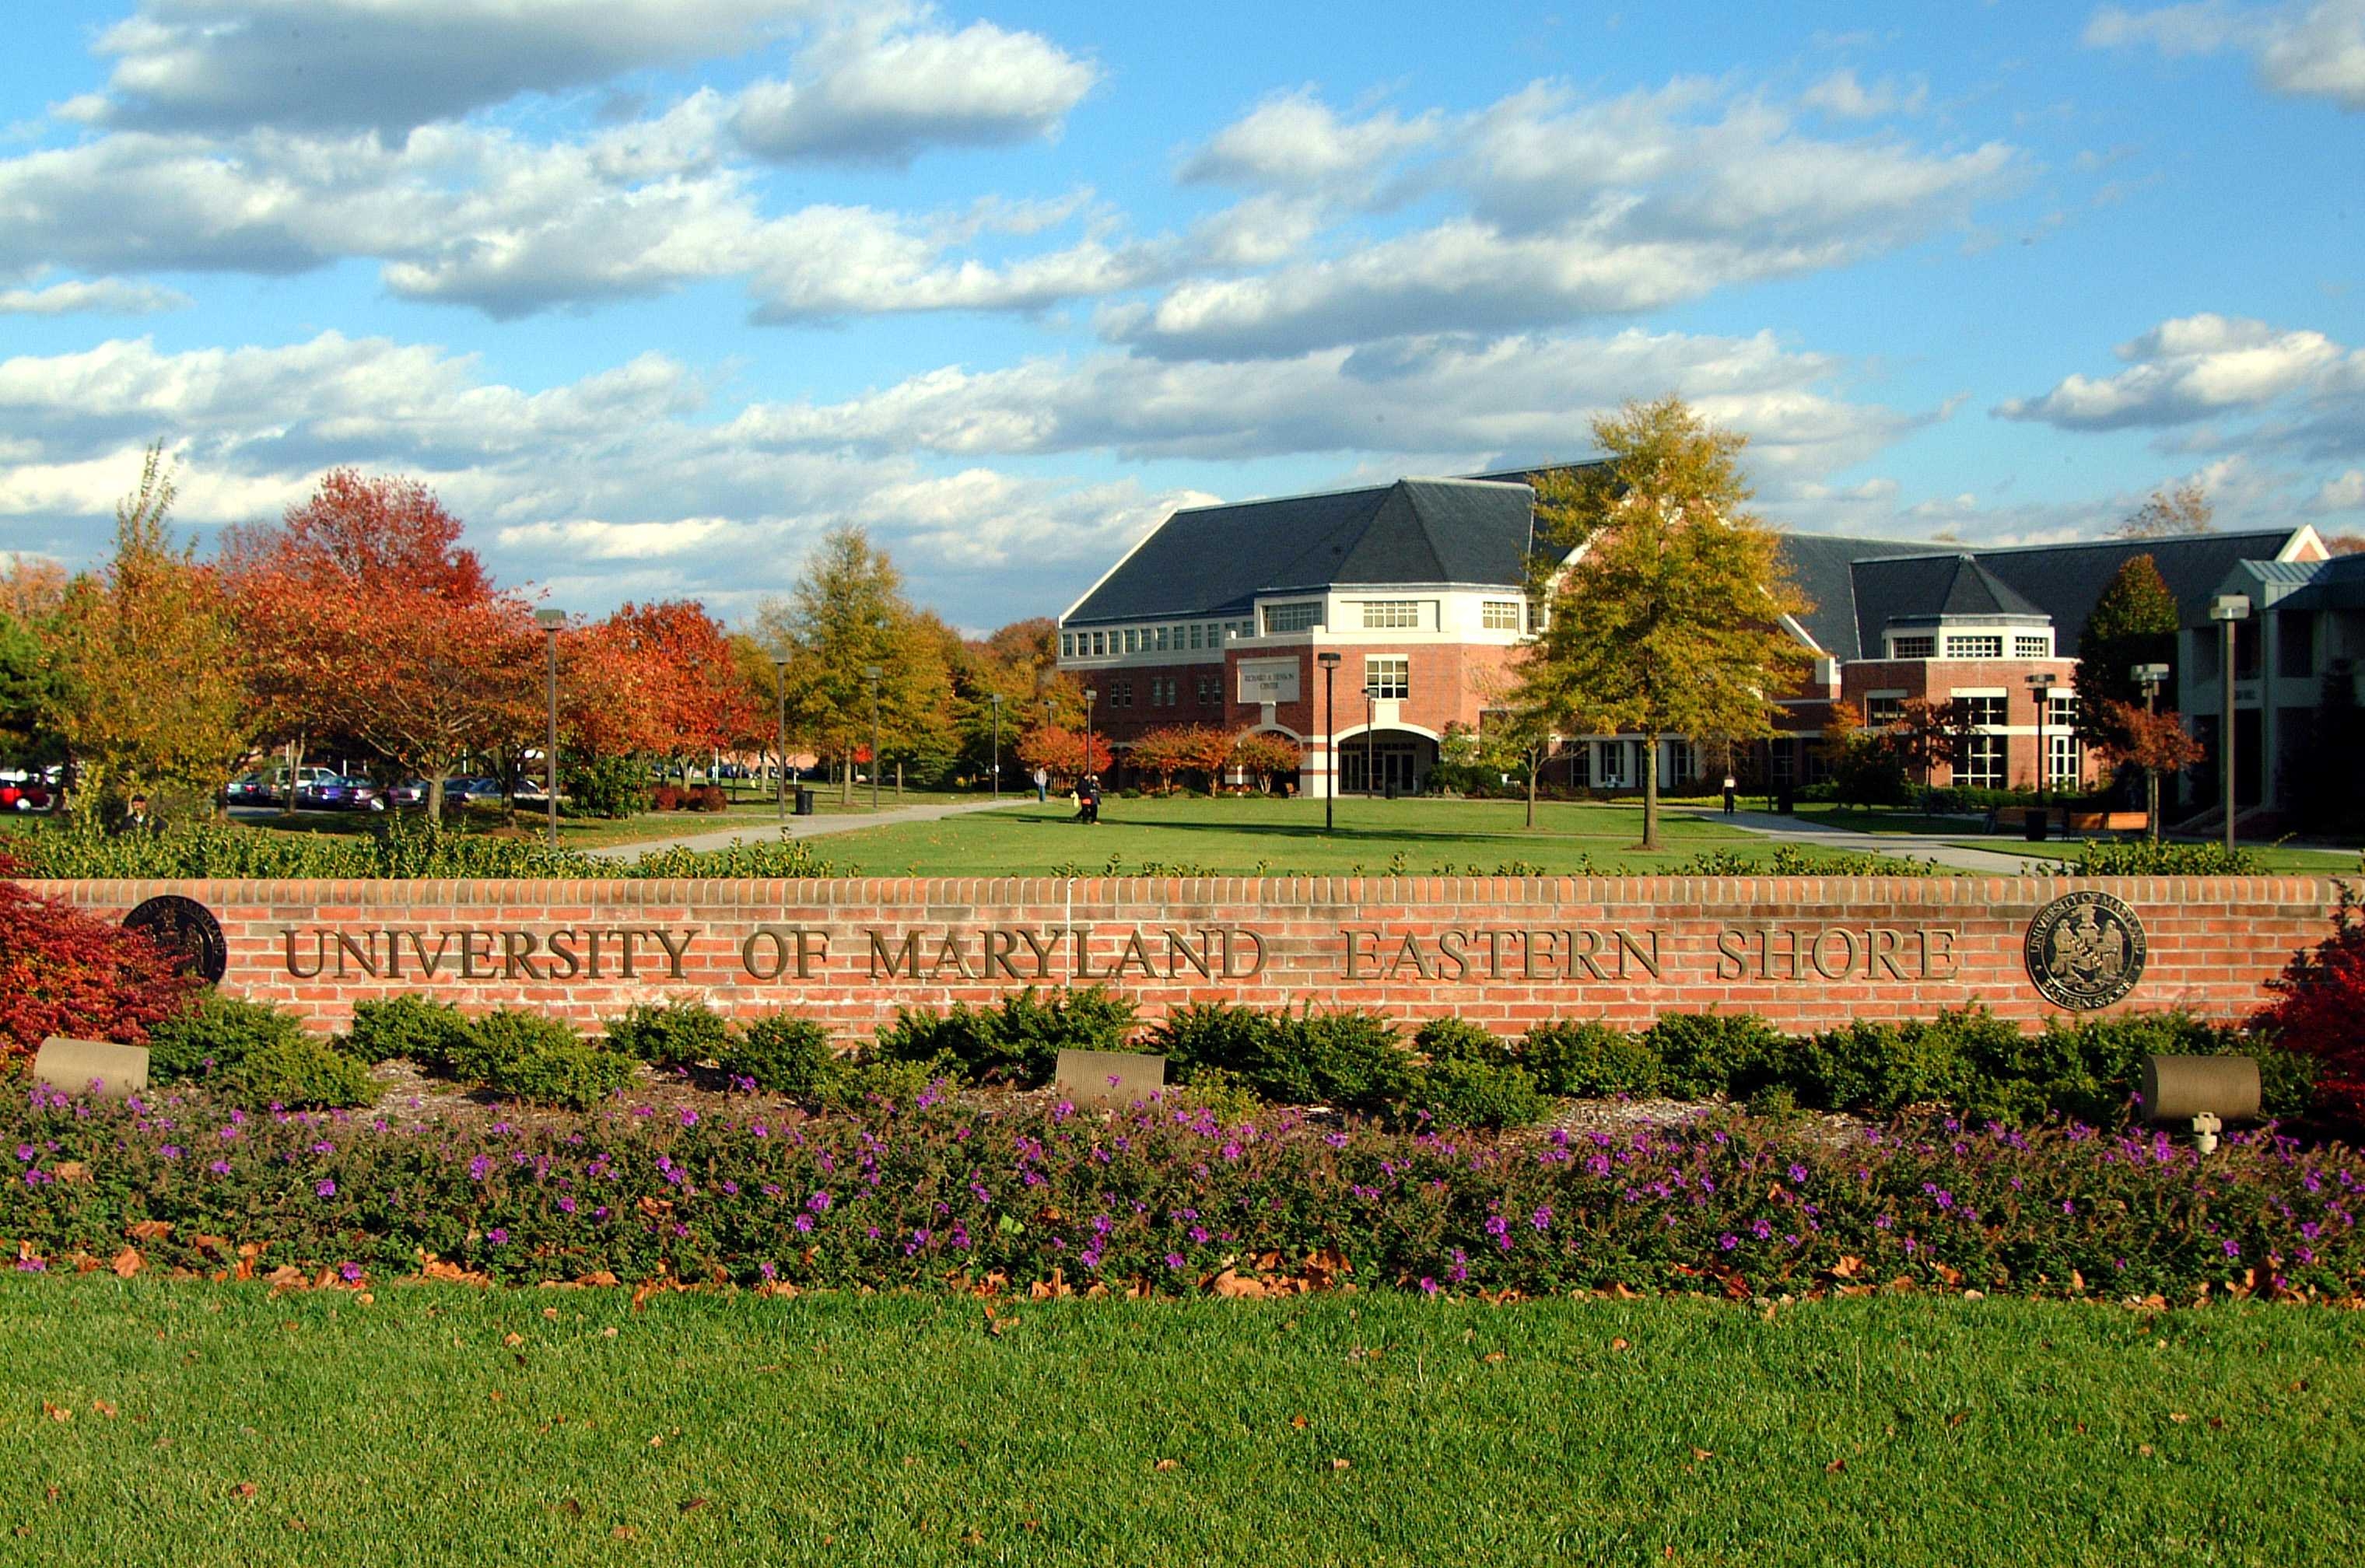 UMd.-Eastern Shore lacked over oversight of grant and loan programs, had potential conflicts, auditors find